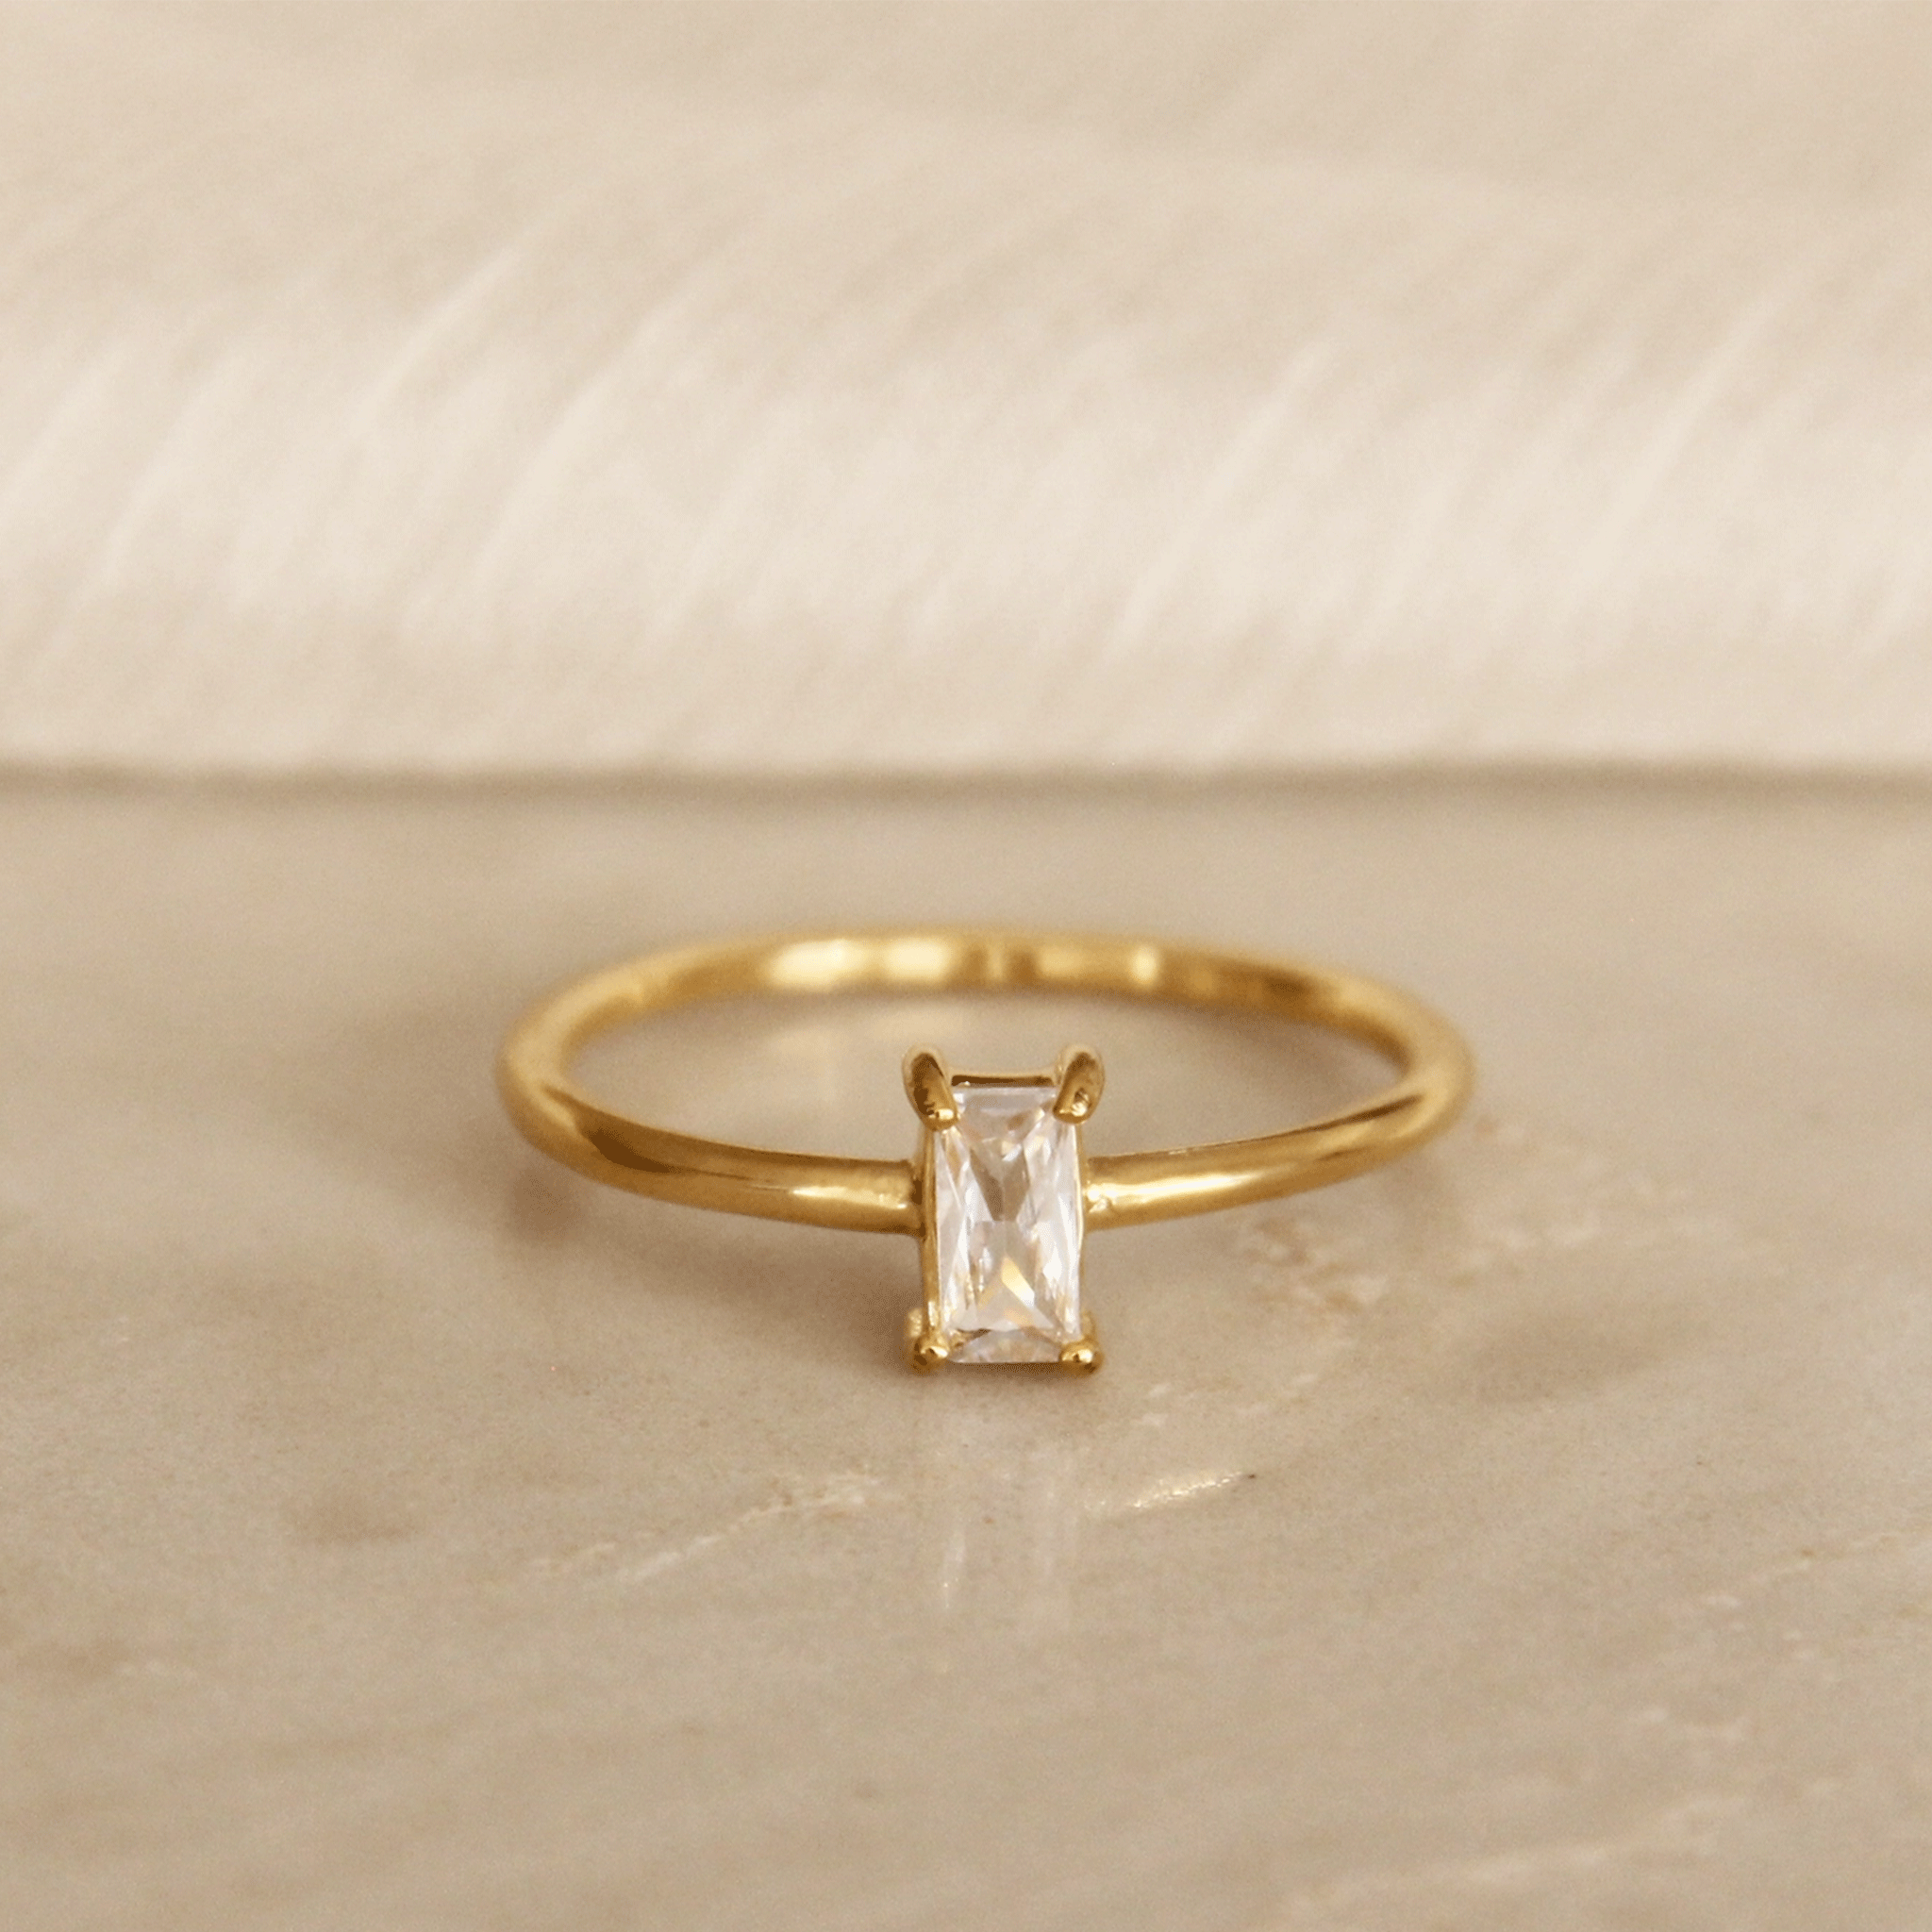 On a tan background is a thin gold band ring with a solitaire baguette shaped cz stone in the center. 